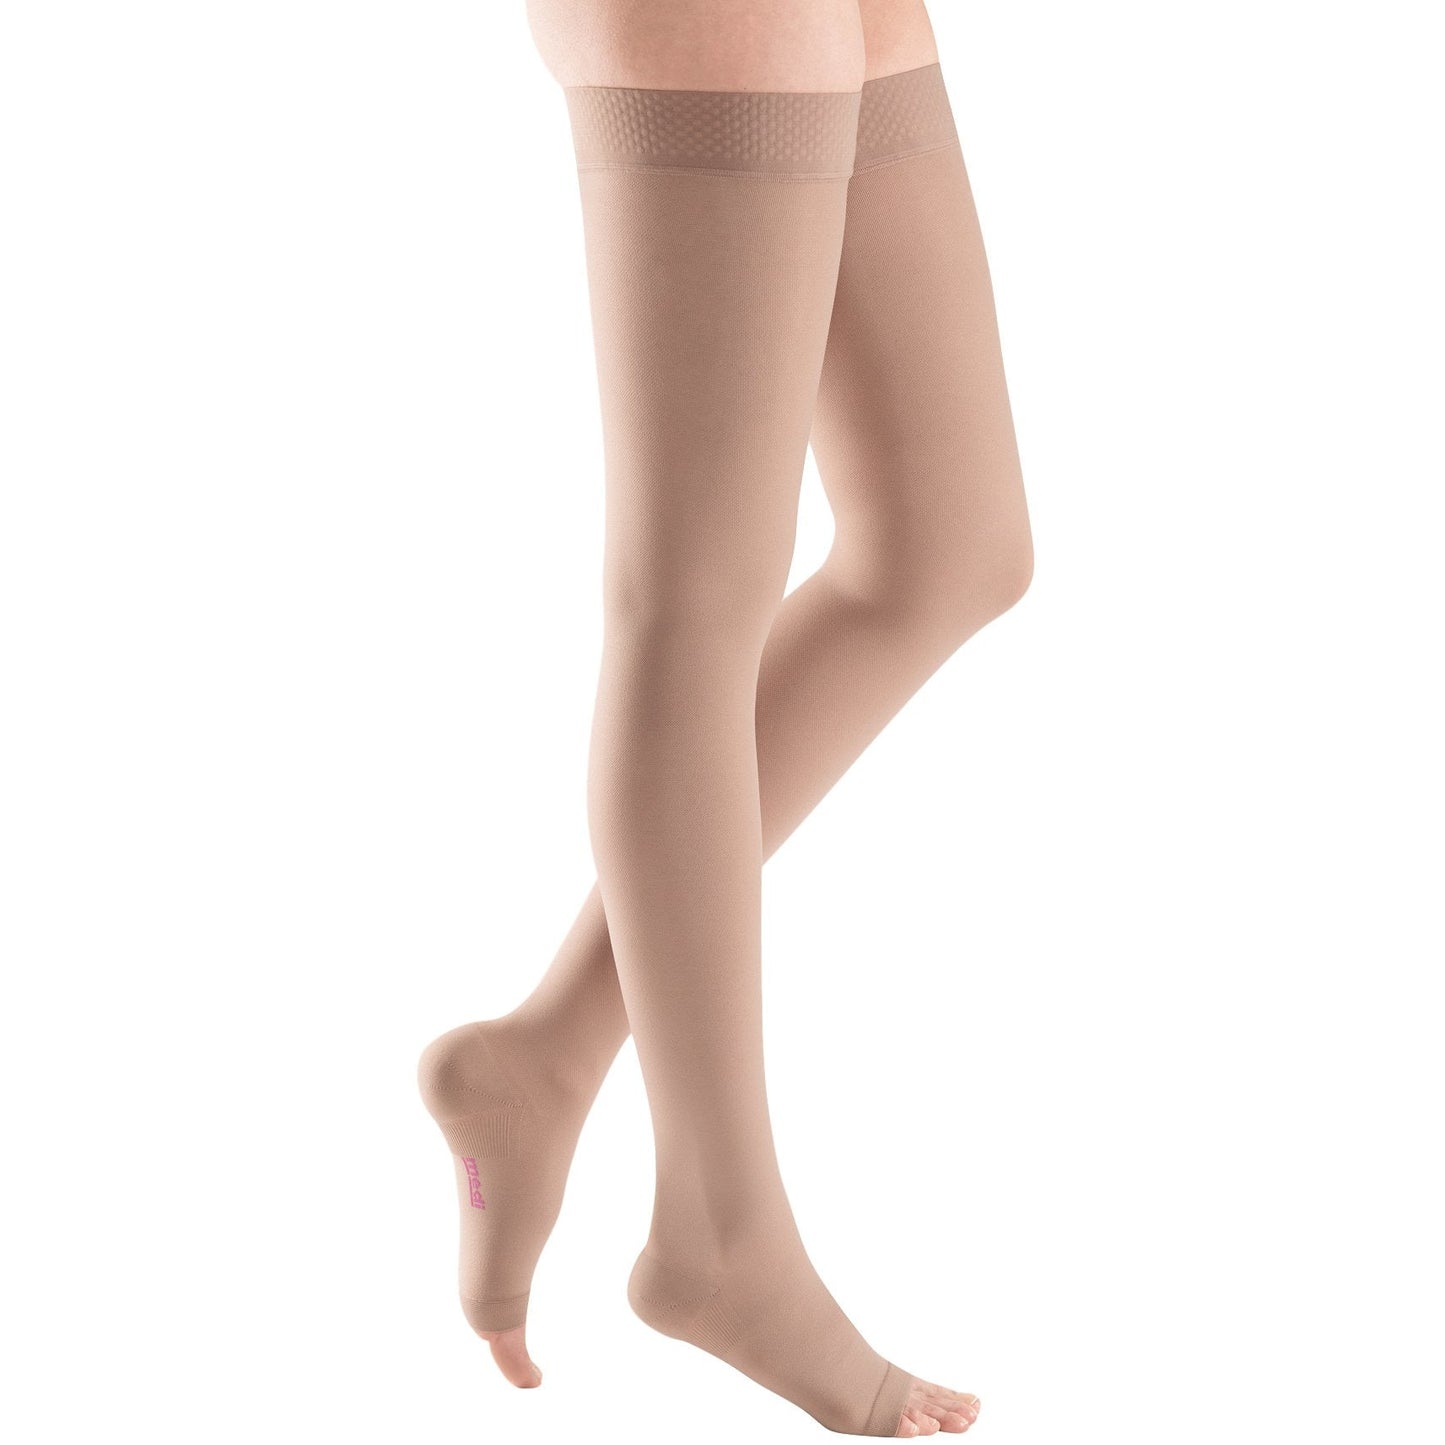 Mediven Plus Thigh High 20-30 mmHg, Open Toe w/ Silicone Top Band [OVERSTOCK]